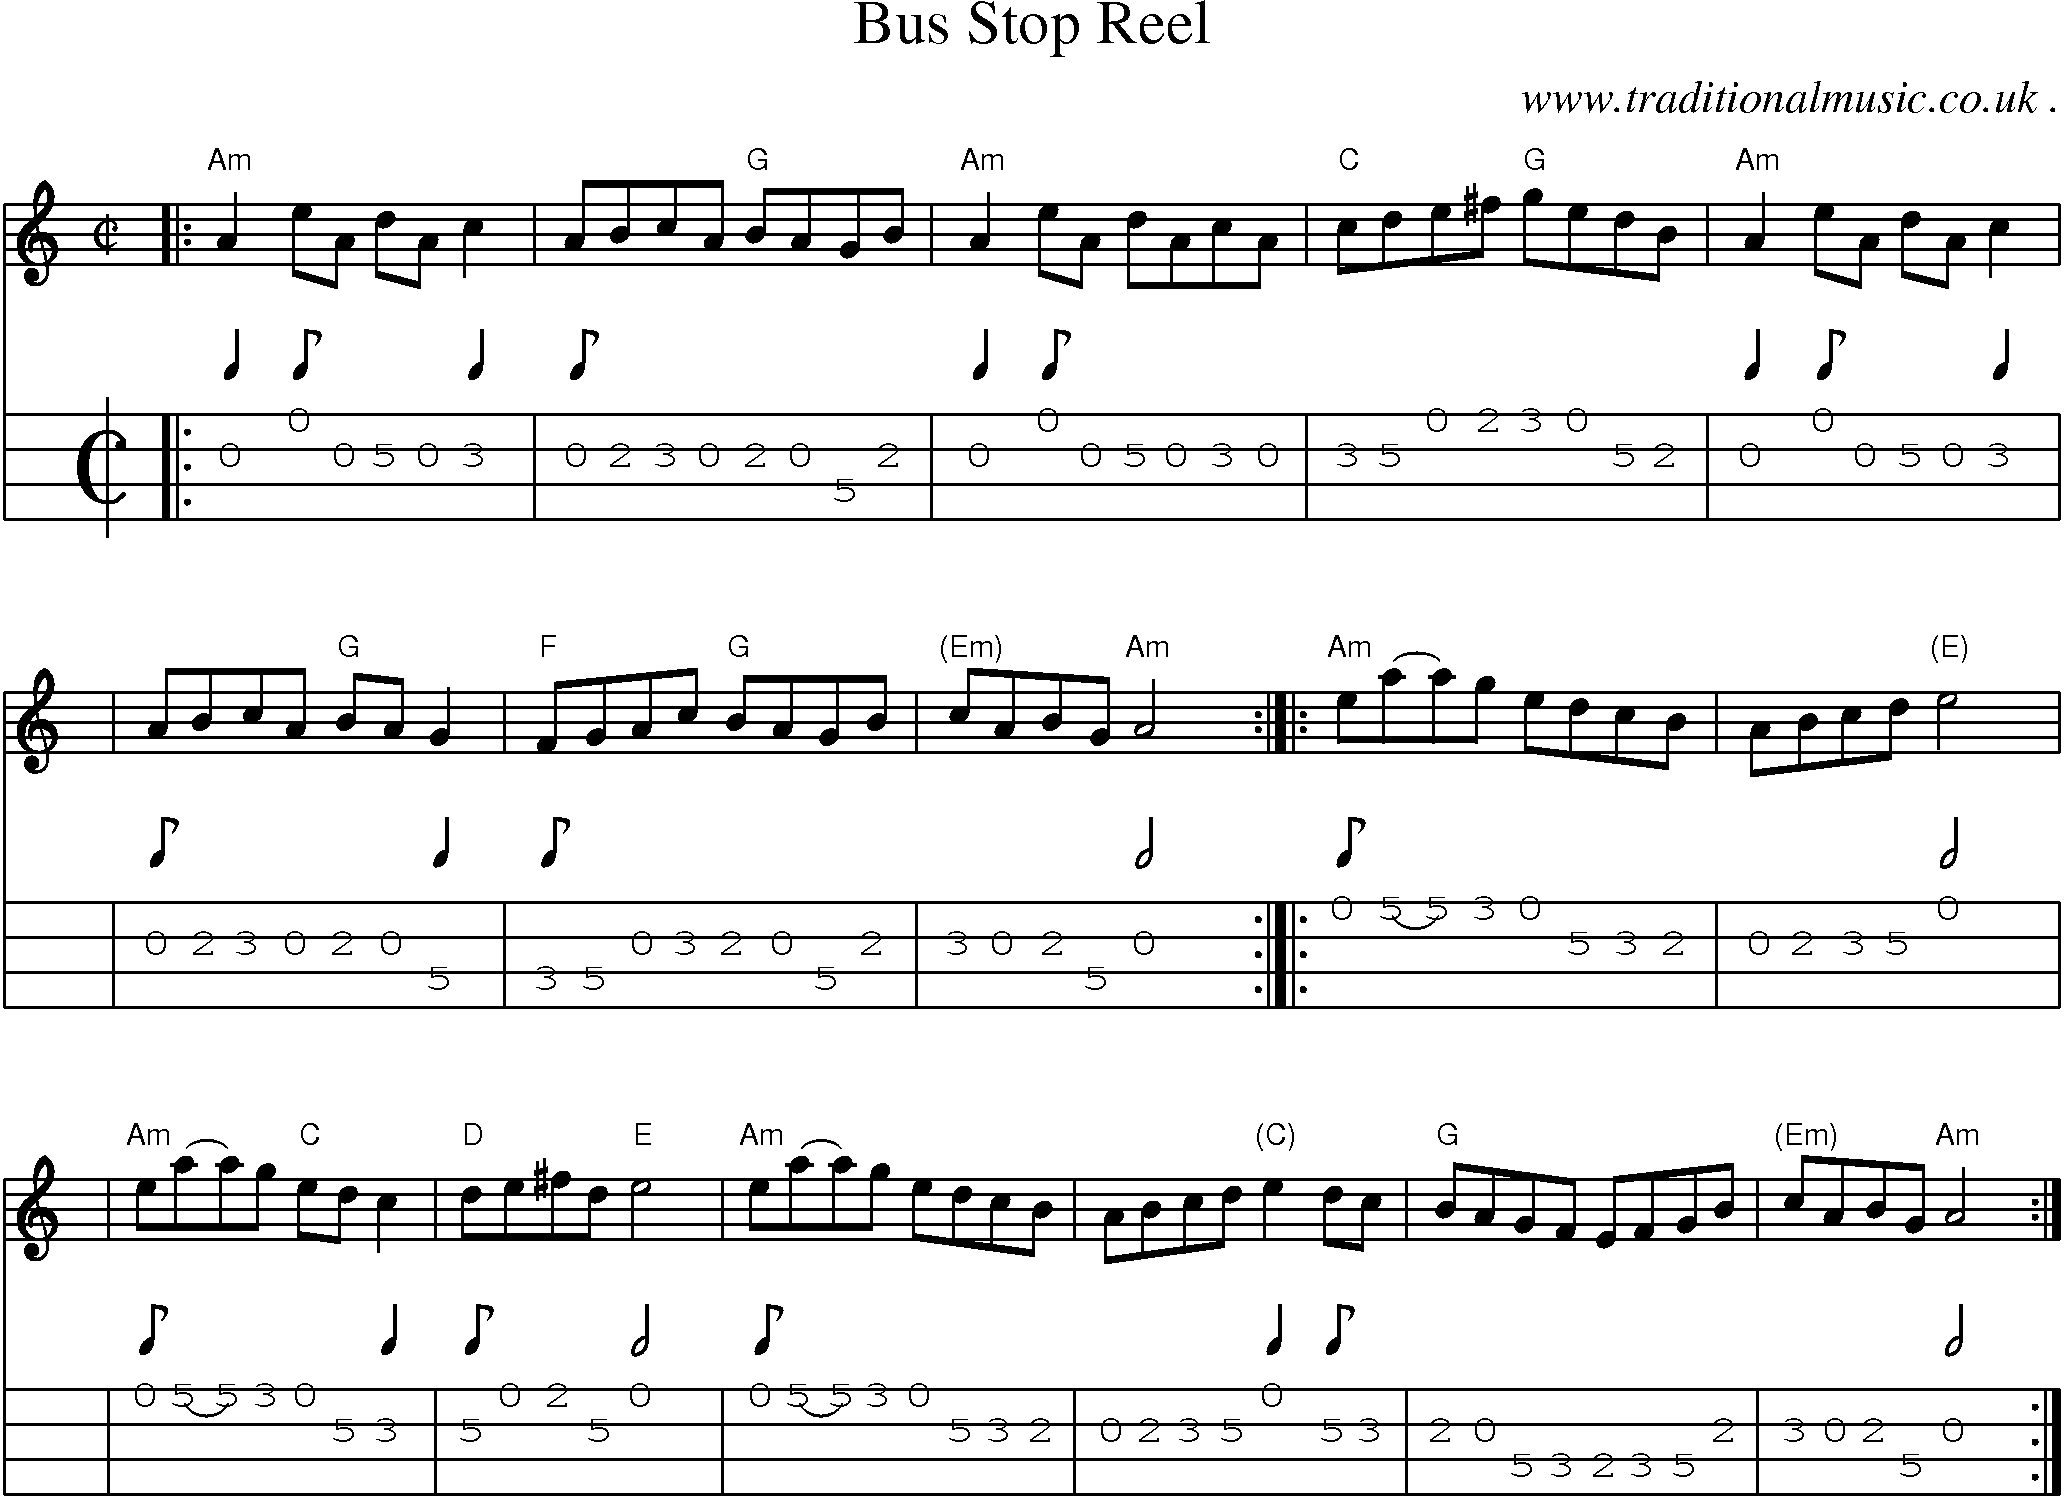 Sheet-music  score, Chords and Mandolin Tabs for Bus Stop Reel